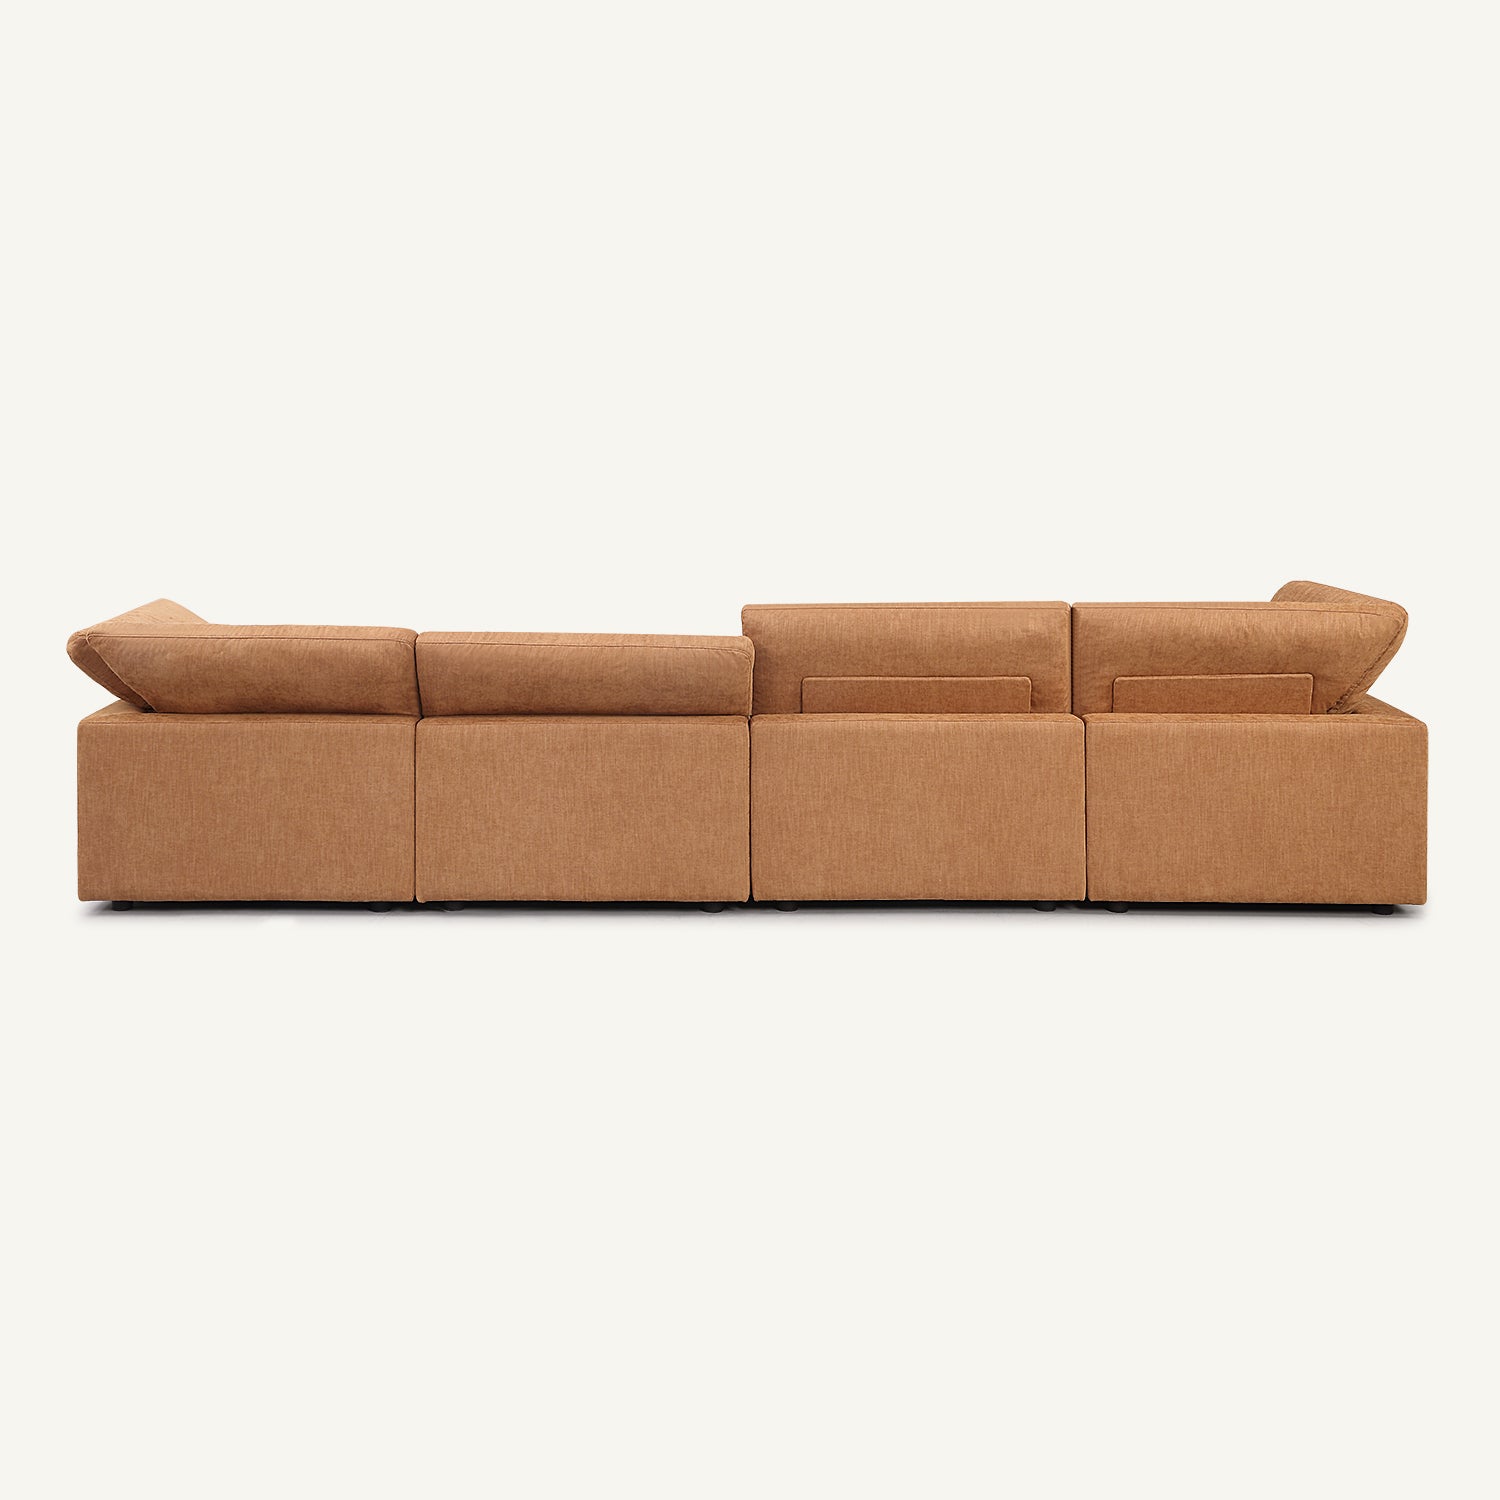 Cloud Tan Linen 5-Seat Sofa with Double Ottomans